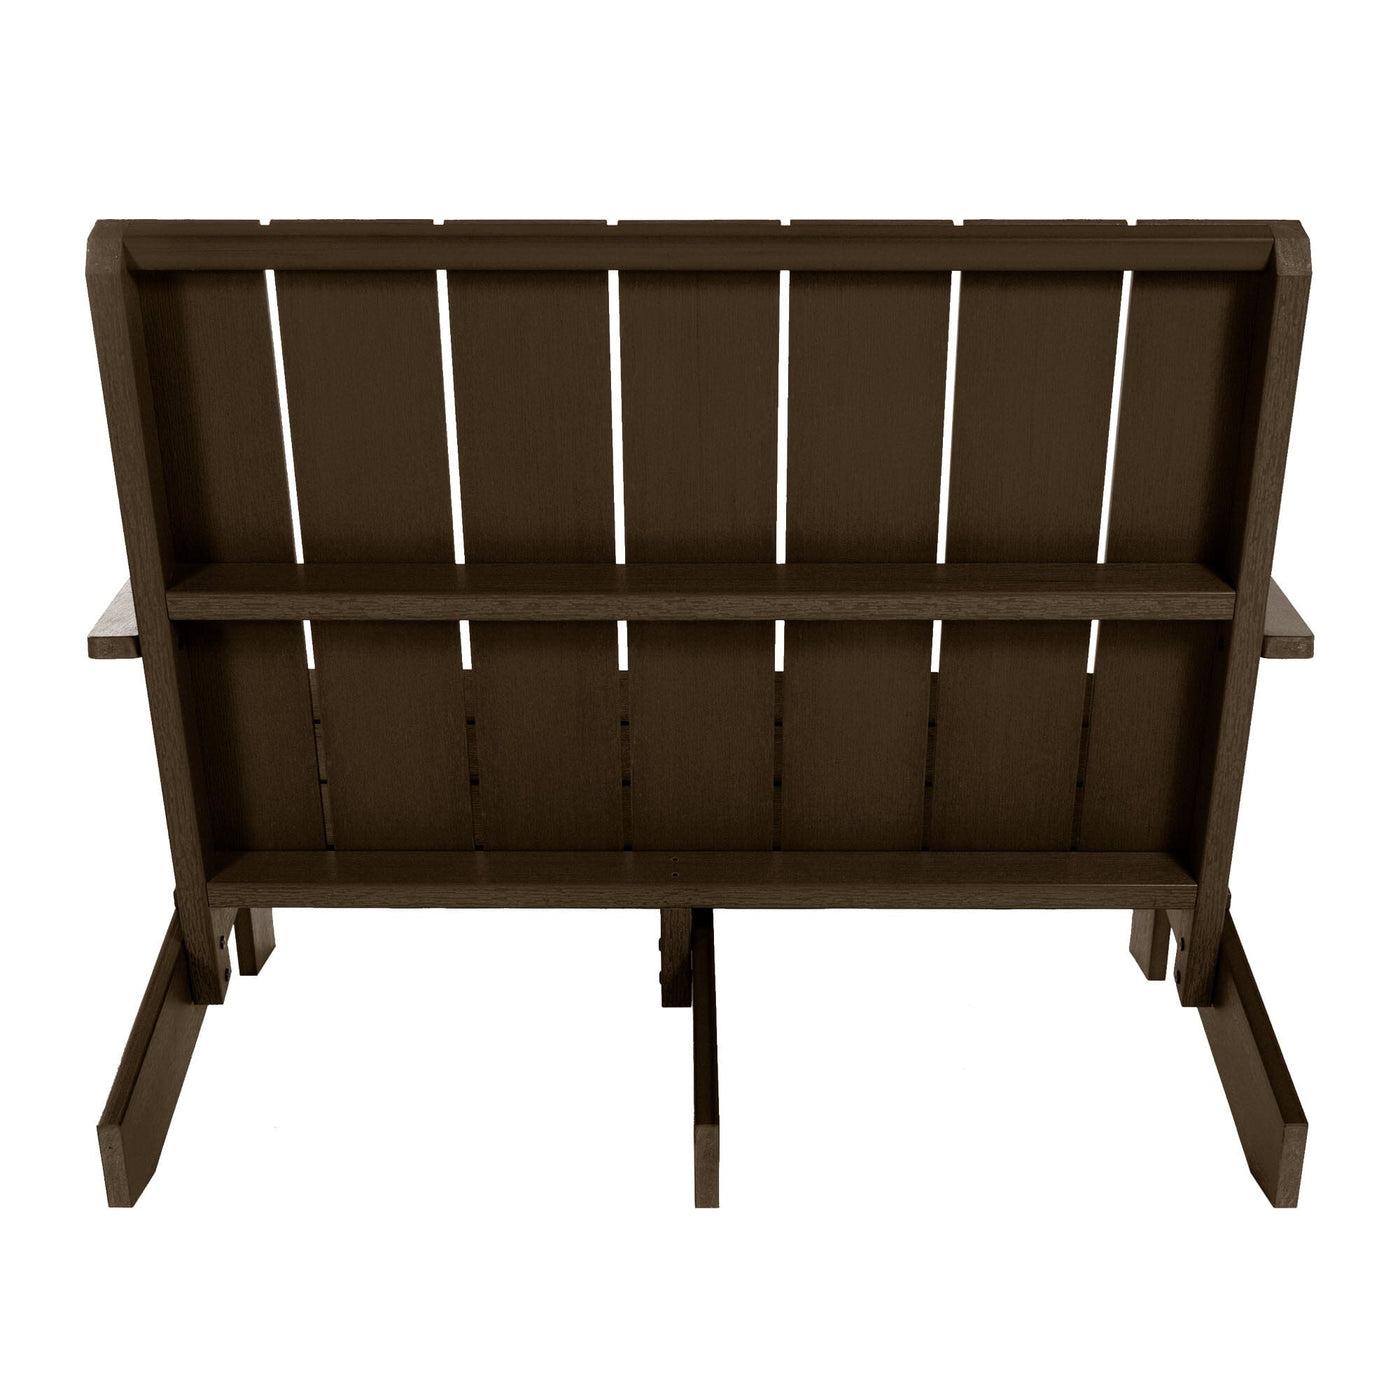 Back view of Italica Modern bench in Weathered Acorn brown